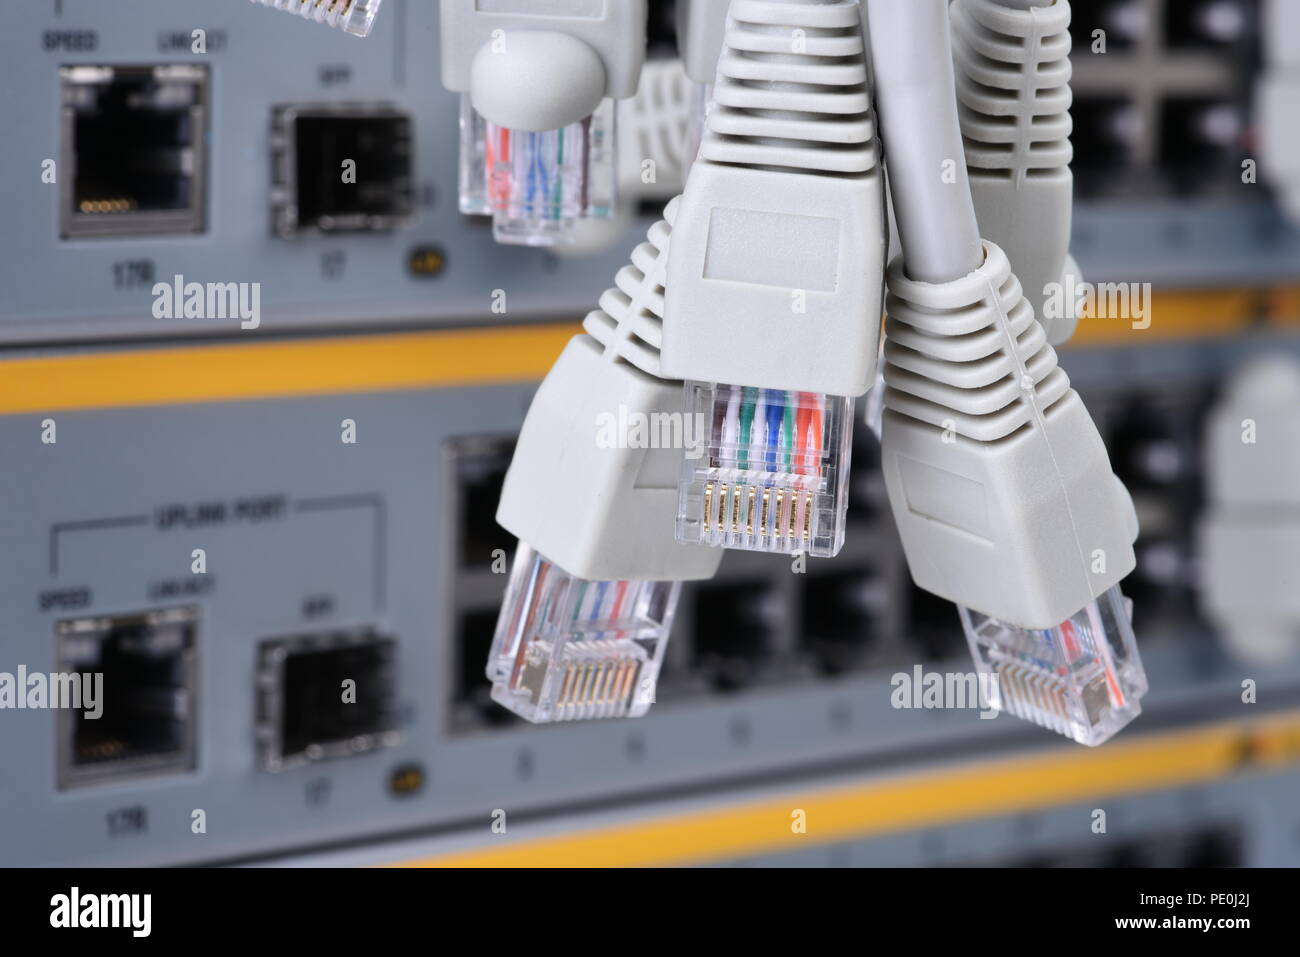 Network patch cord cable RJ45 connectors Stock Photo